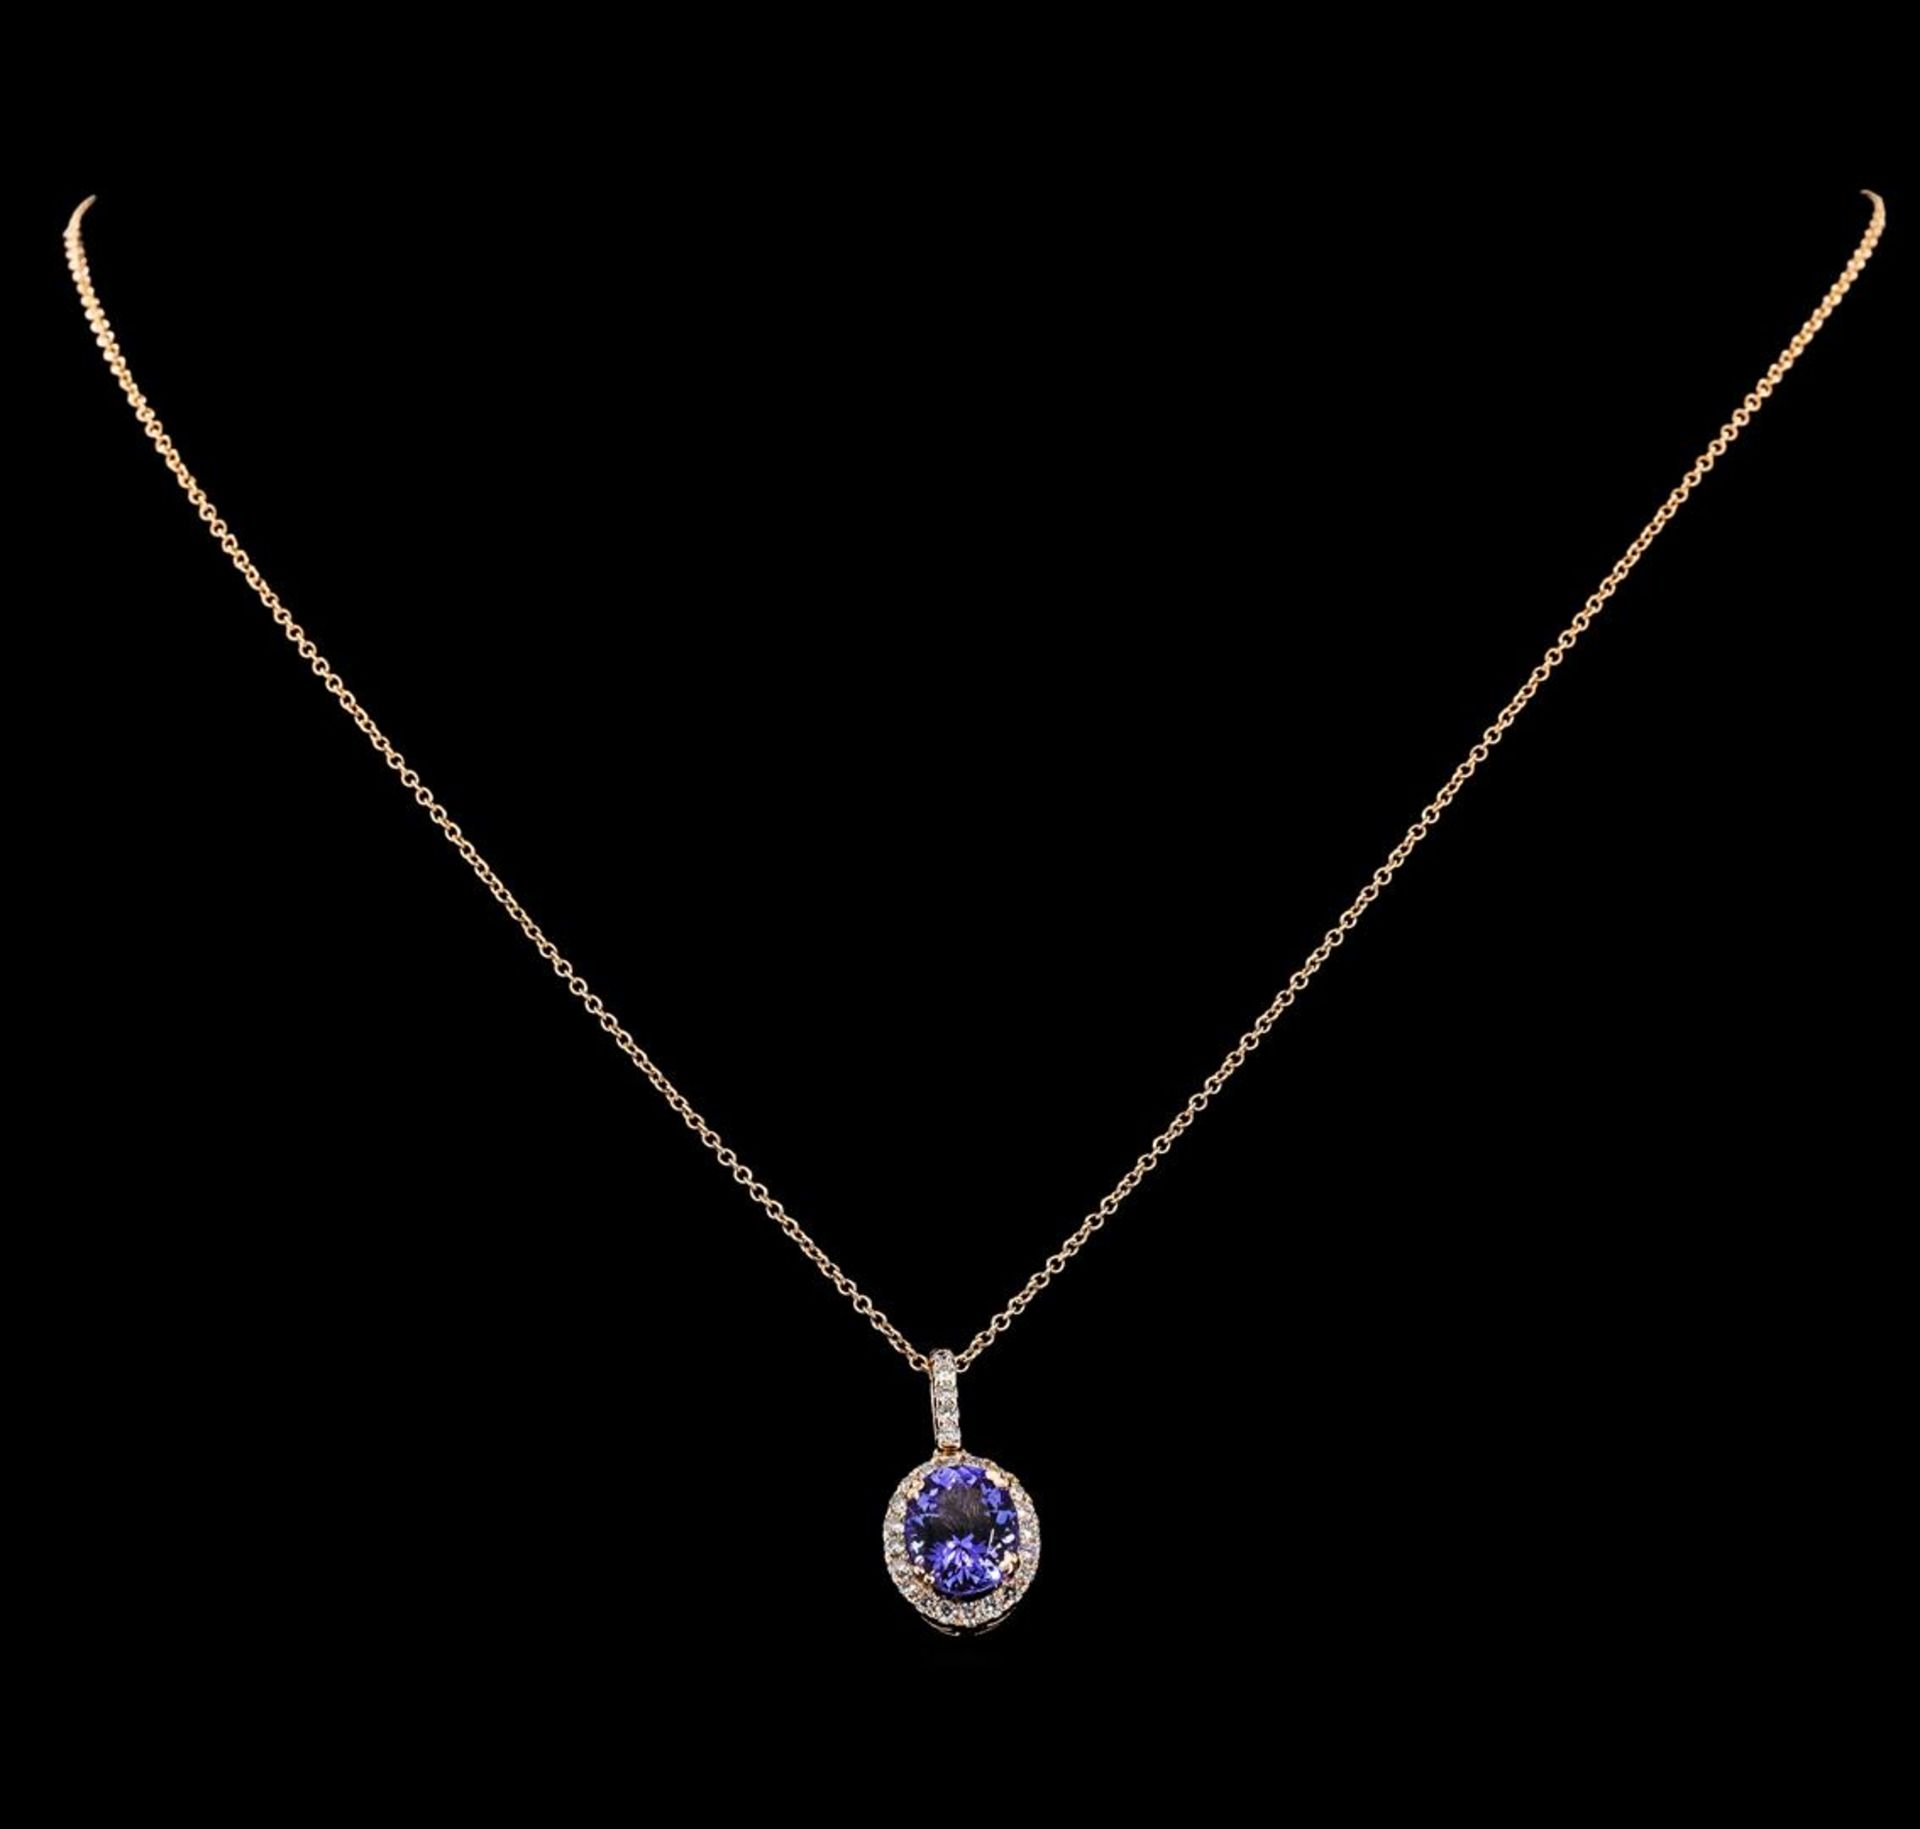 2.46ct Tanzanite and Diamond Pendant With Chain - 14KT Rose Gold